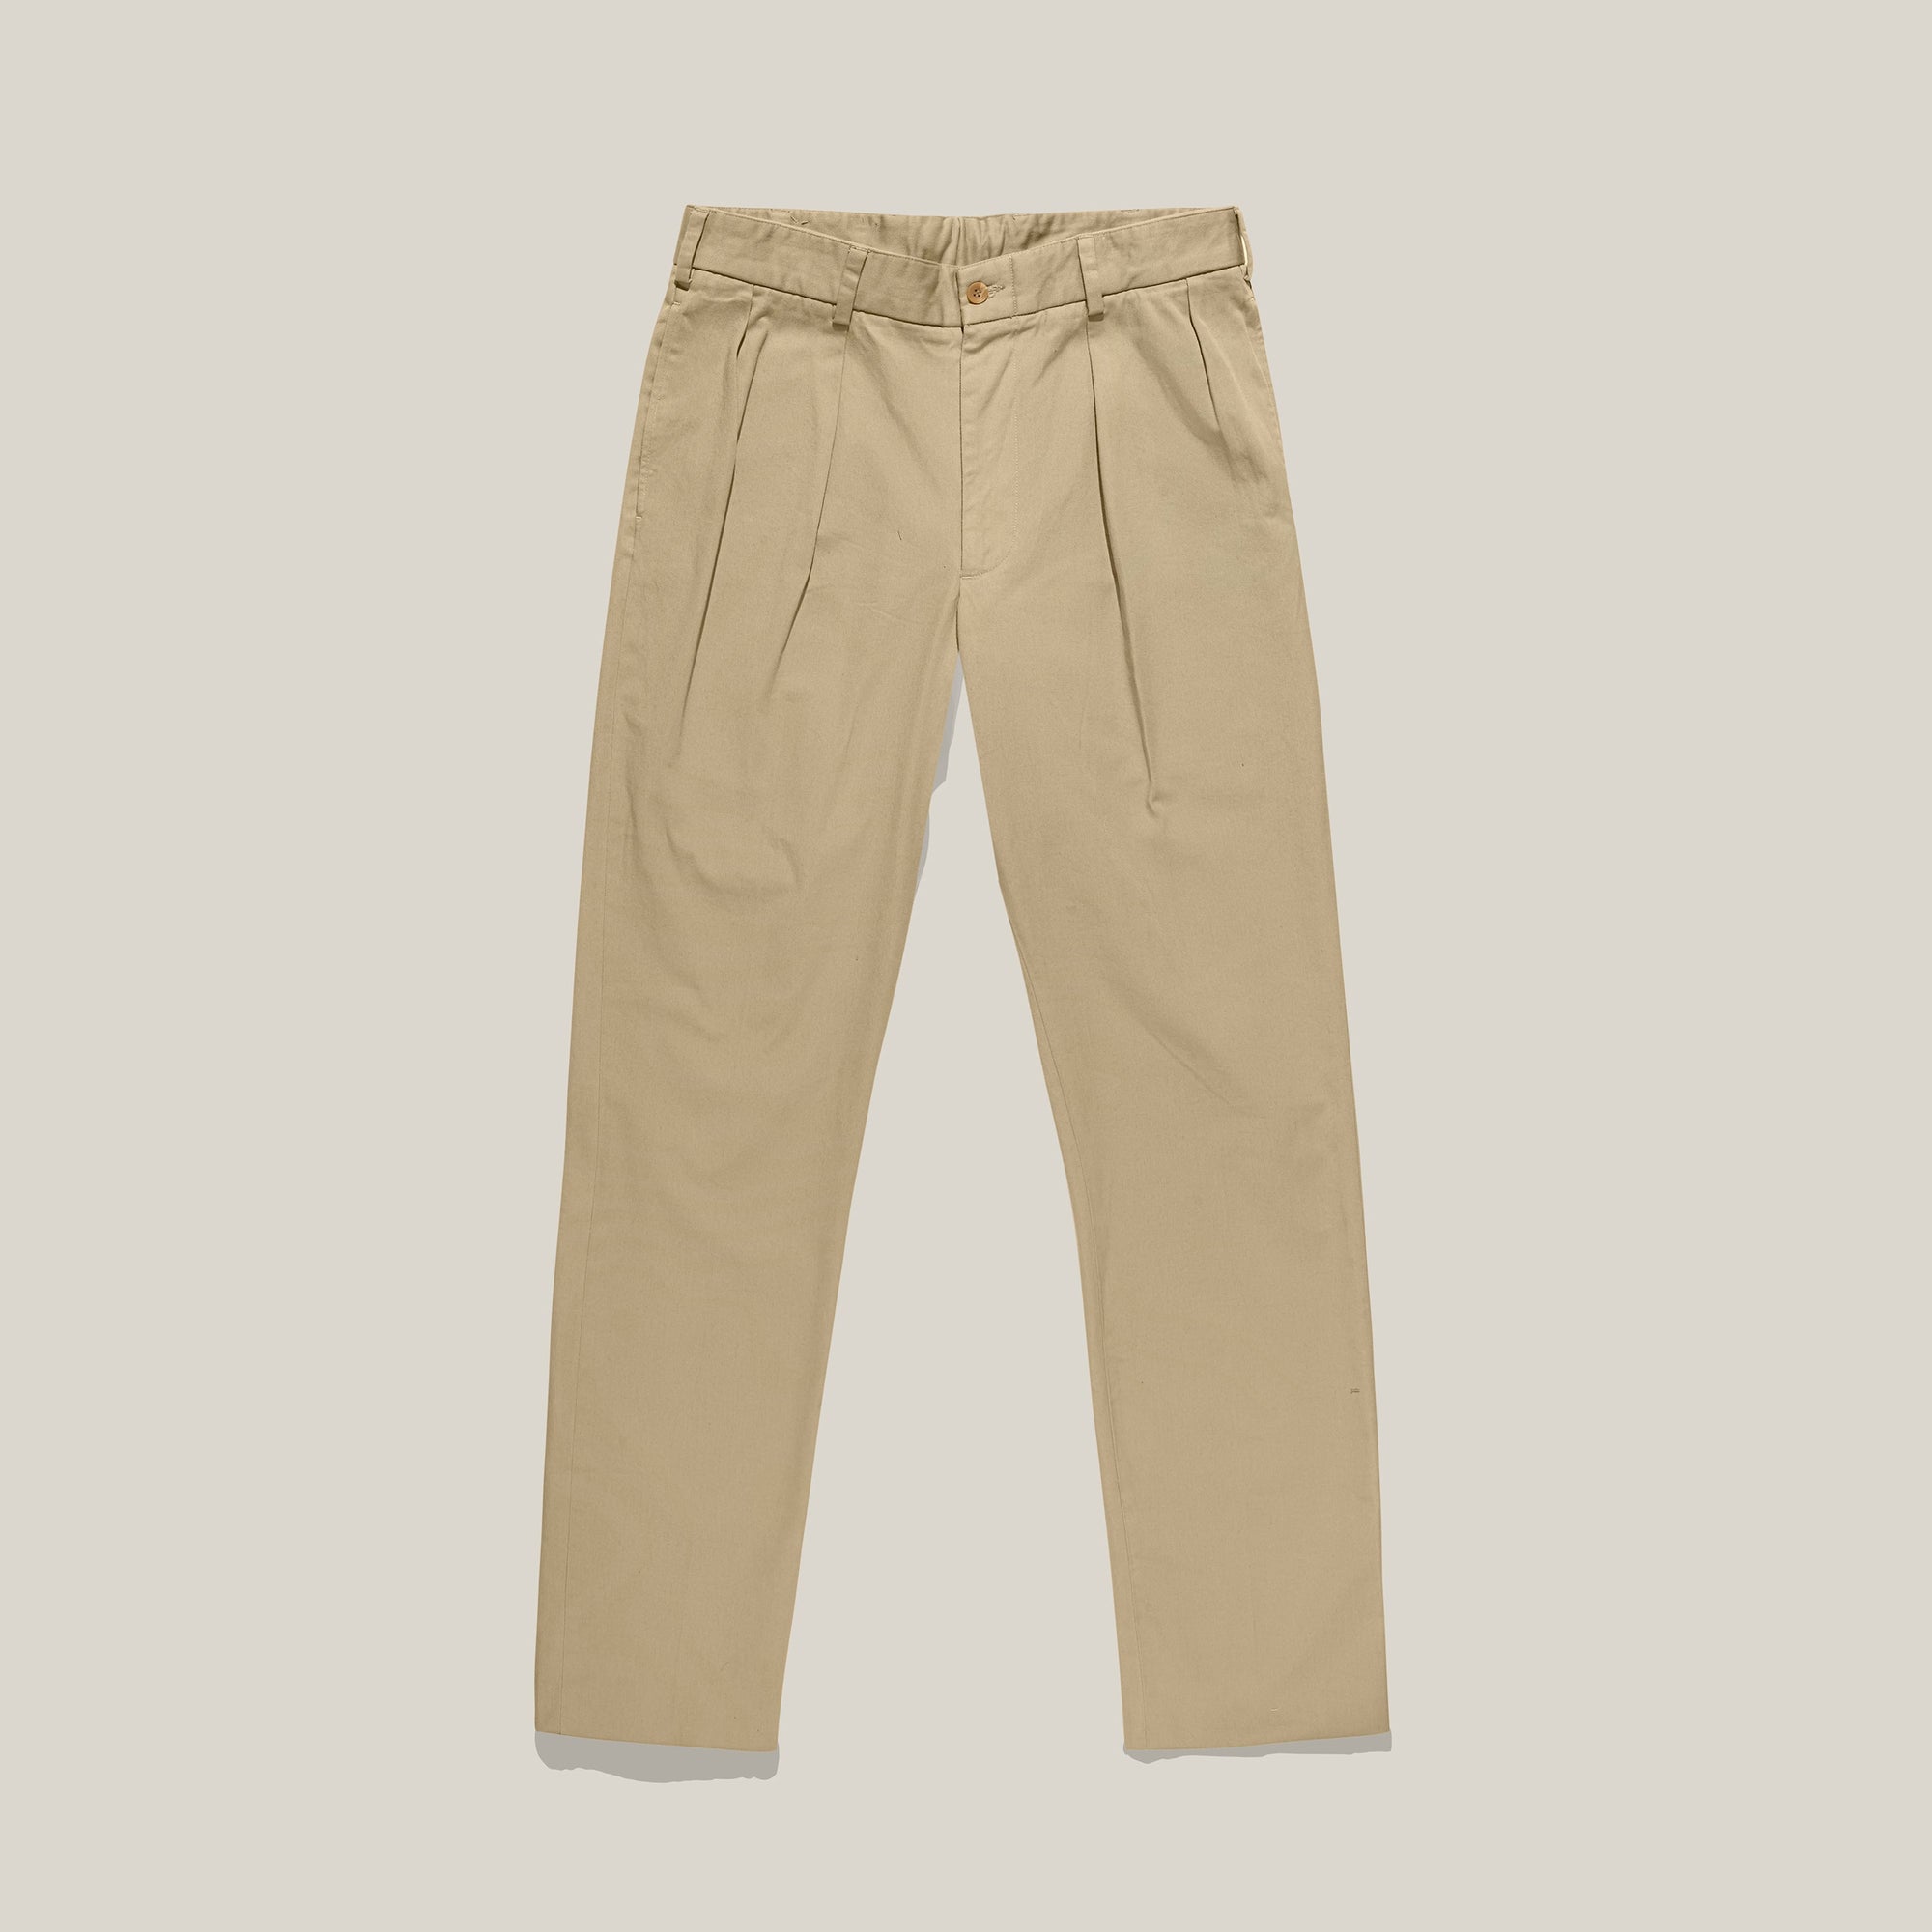 M1P Pleated Relaxed Fit Original Twills in Khaki by Bills Khakis